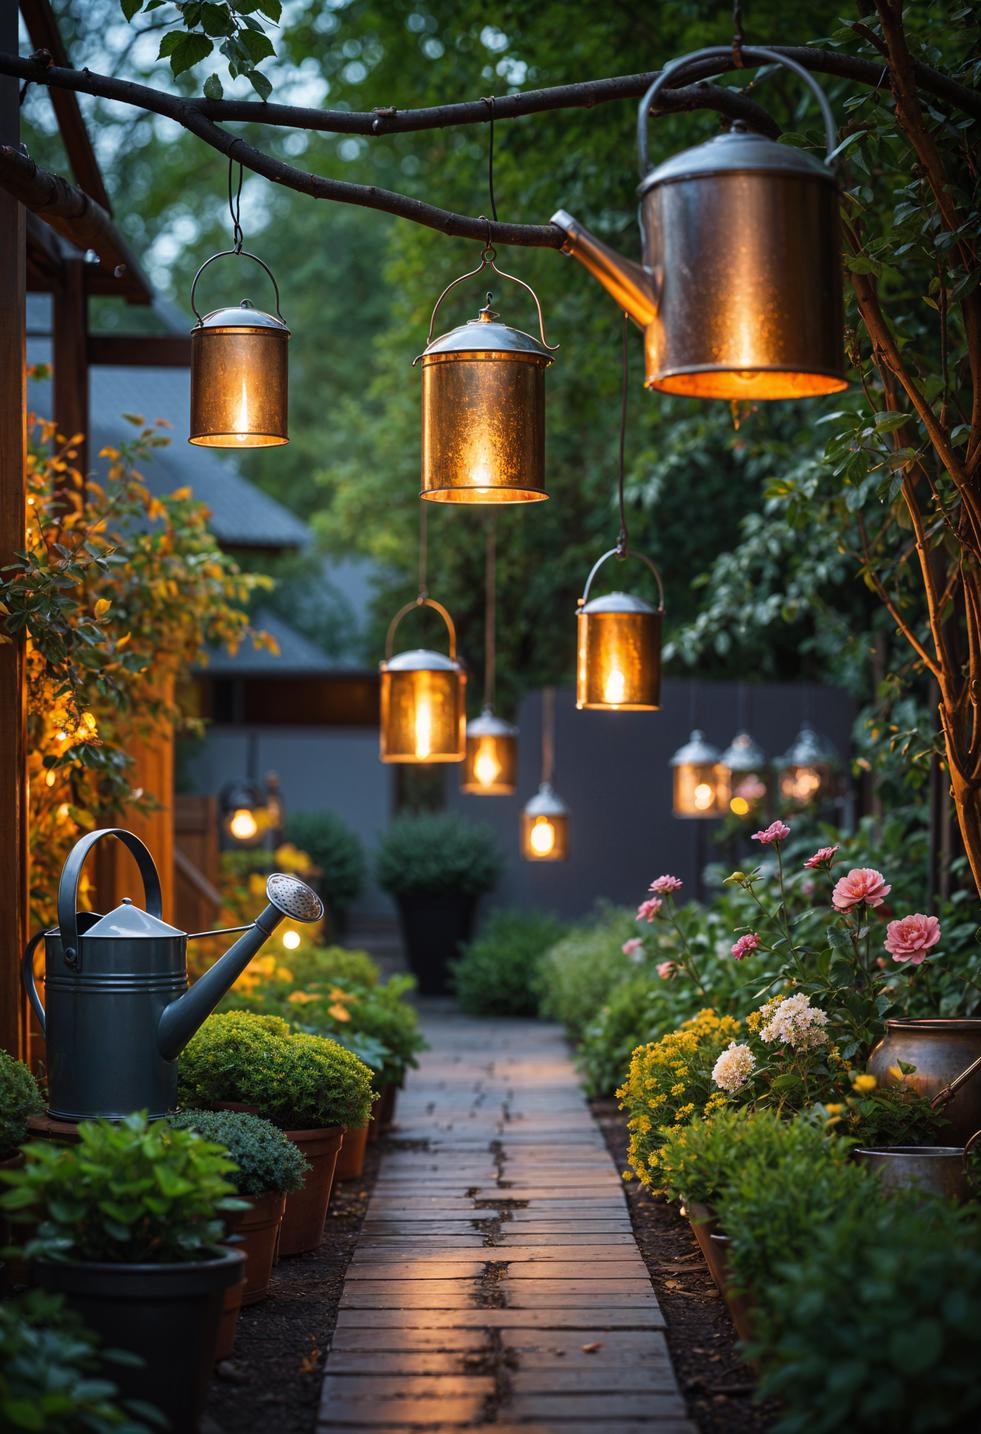 7. Upcycled Garden Lanterns from Cans-1